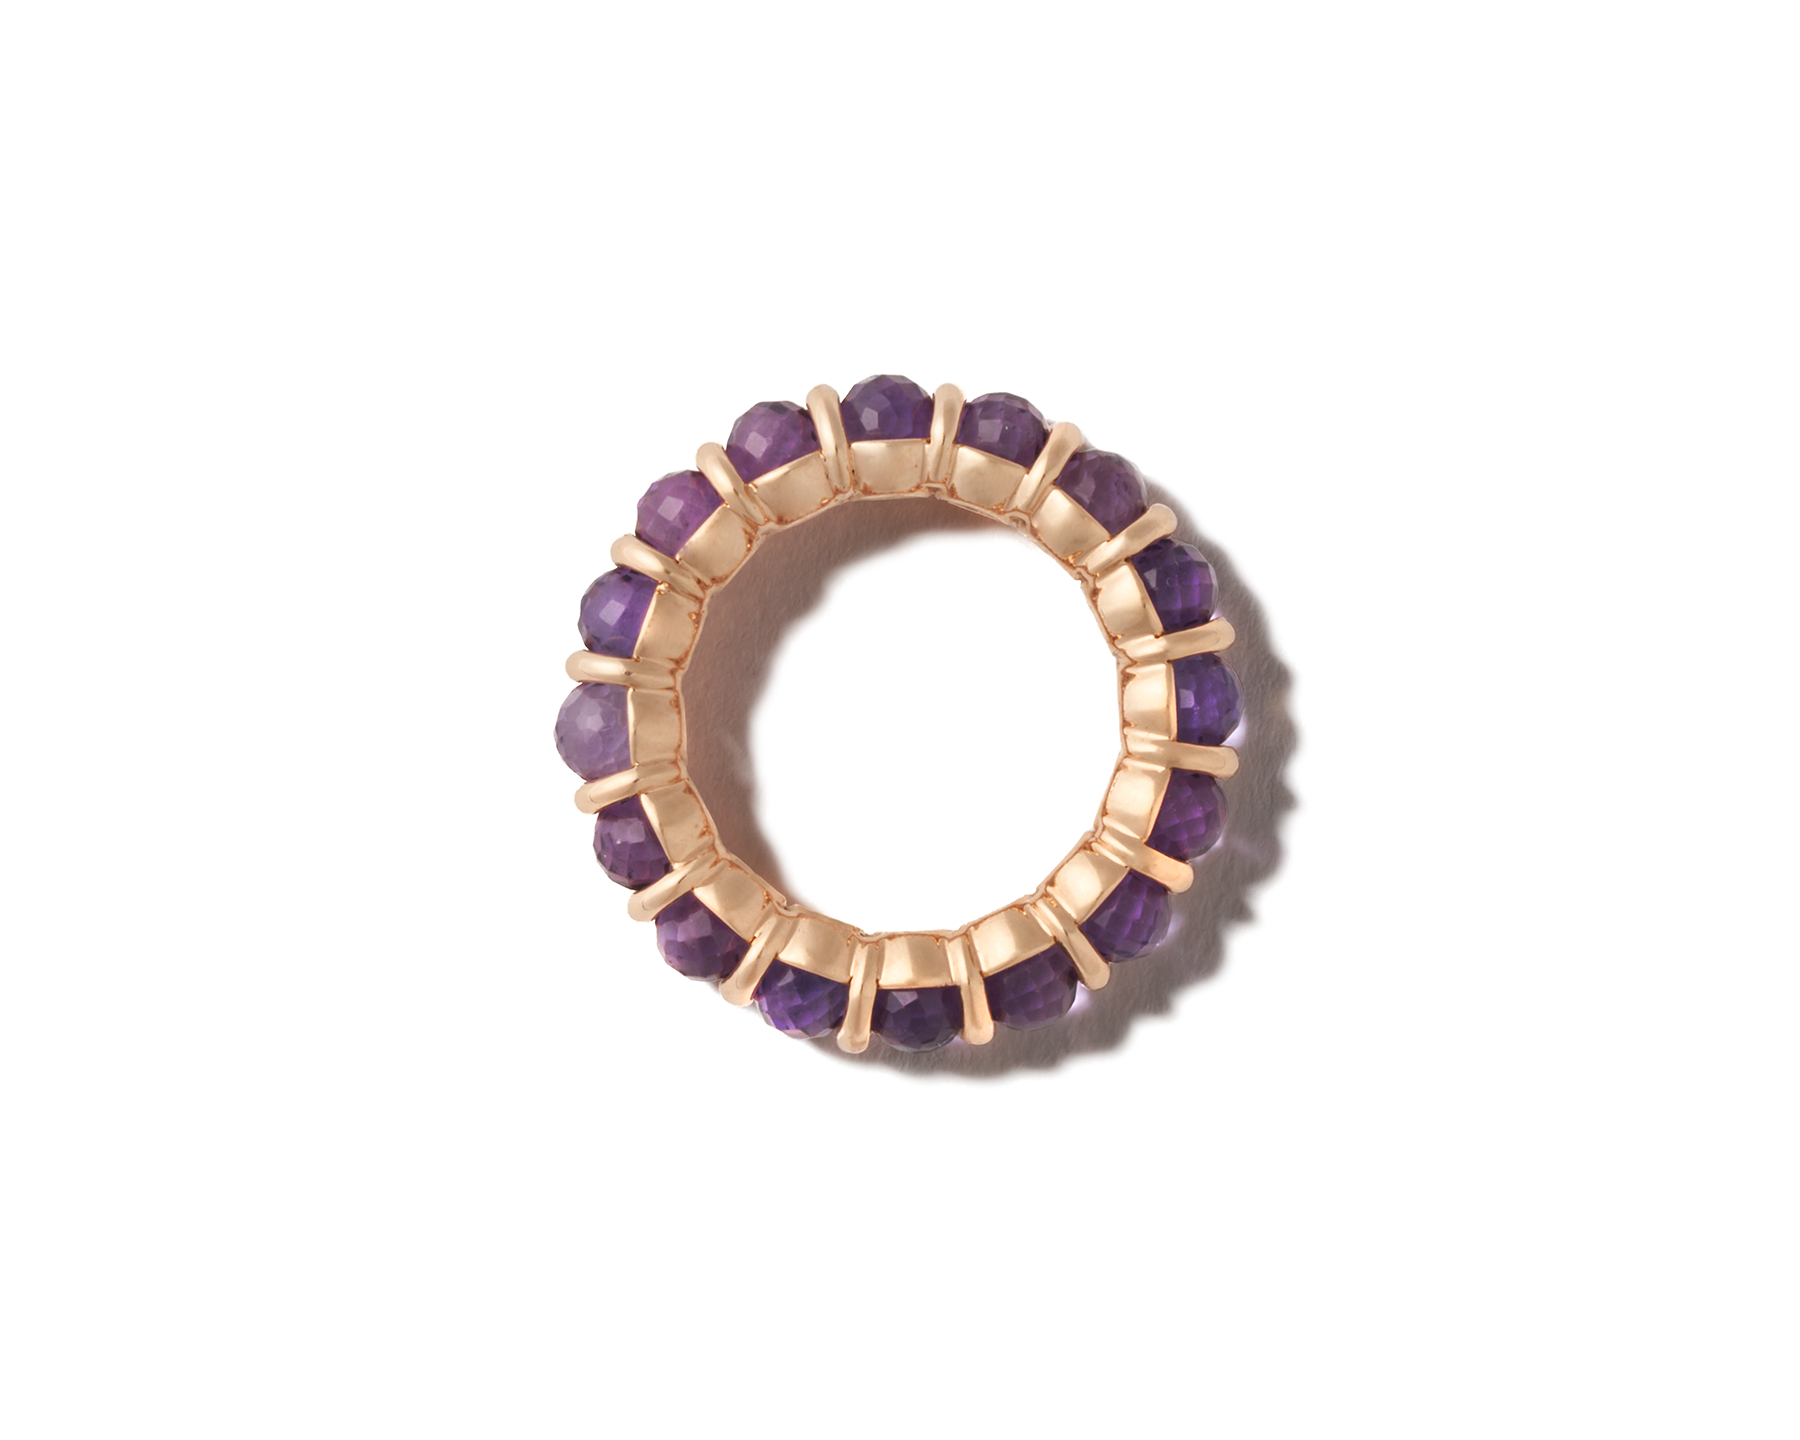 Front shot of gold real amethyst stone ring against white backdrop